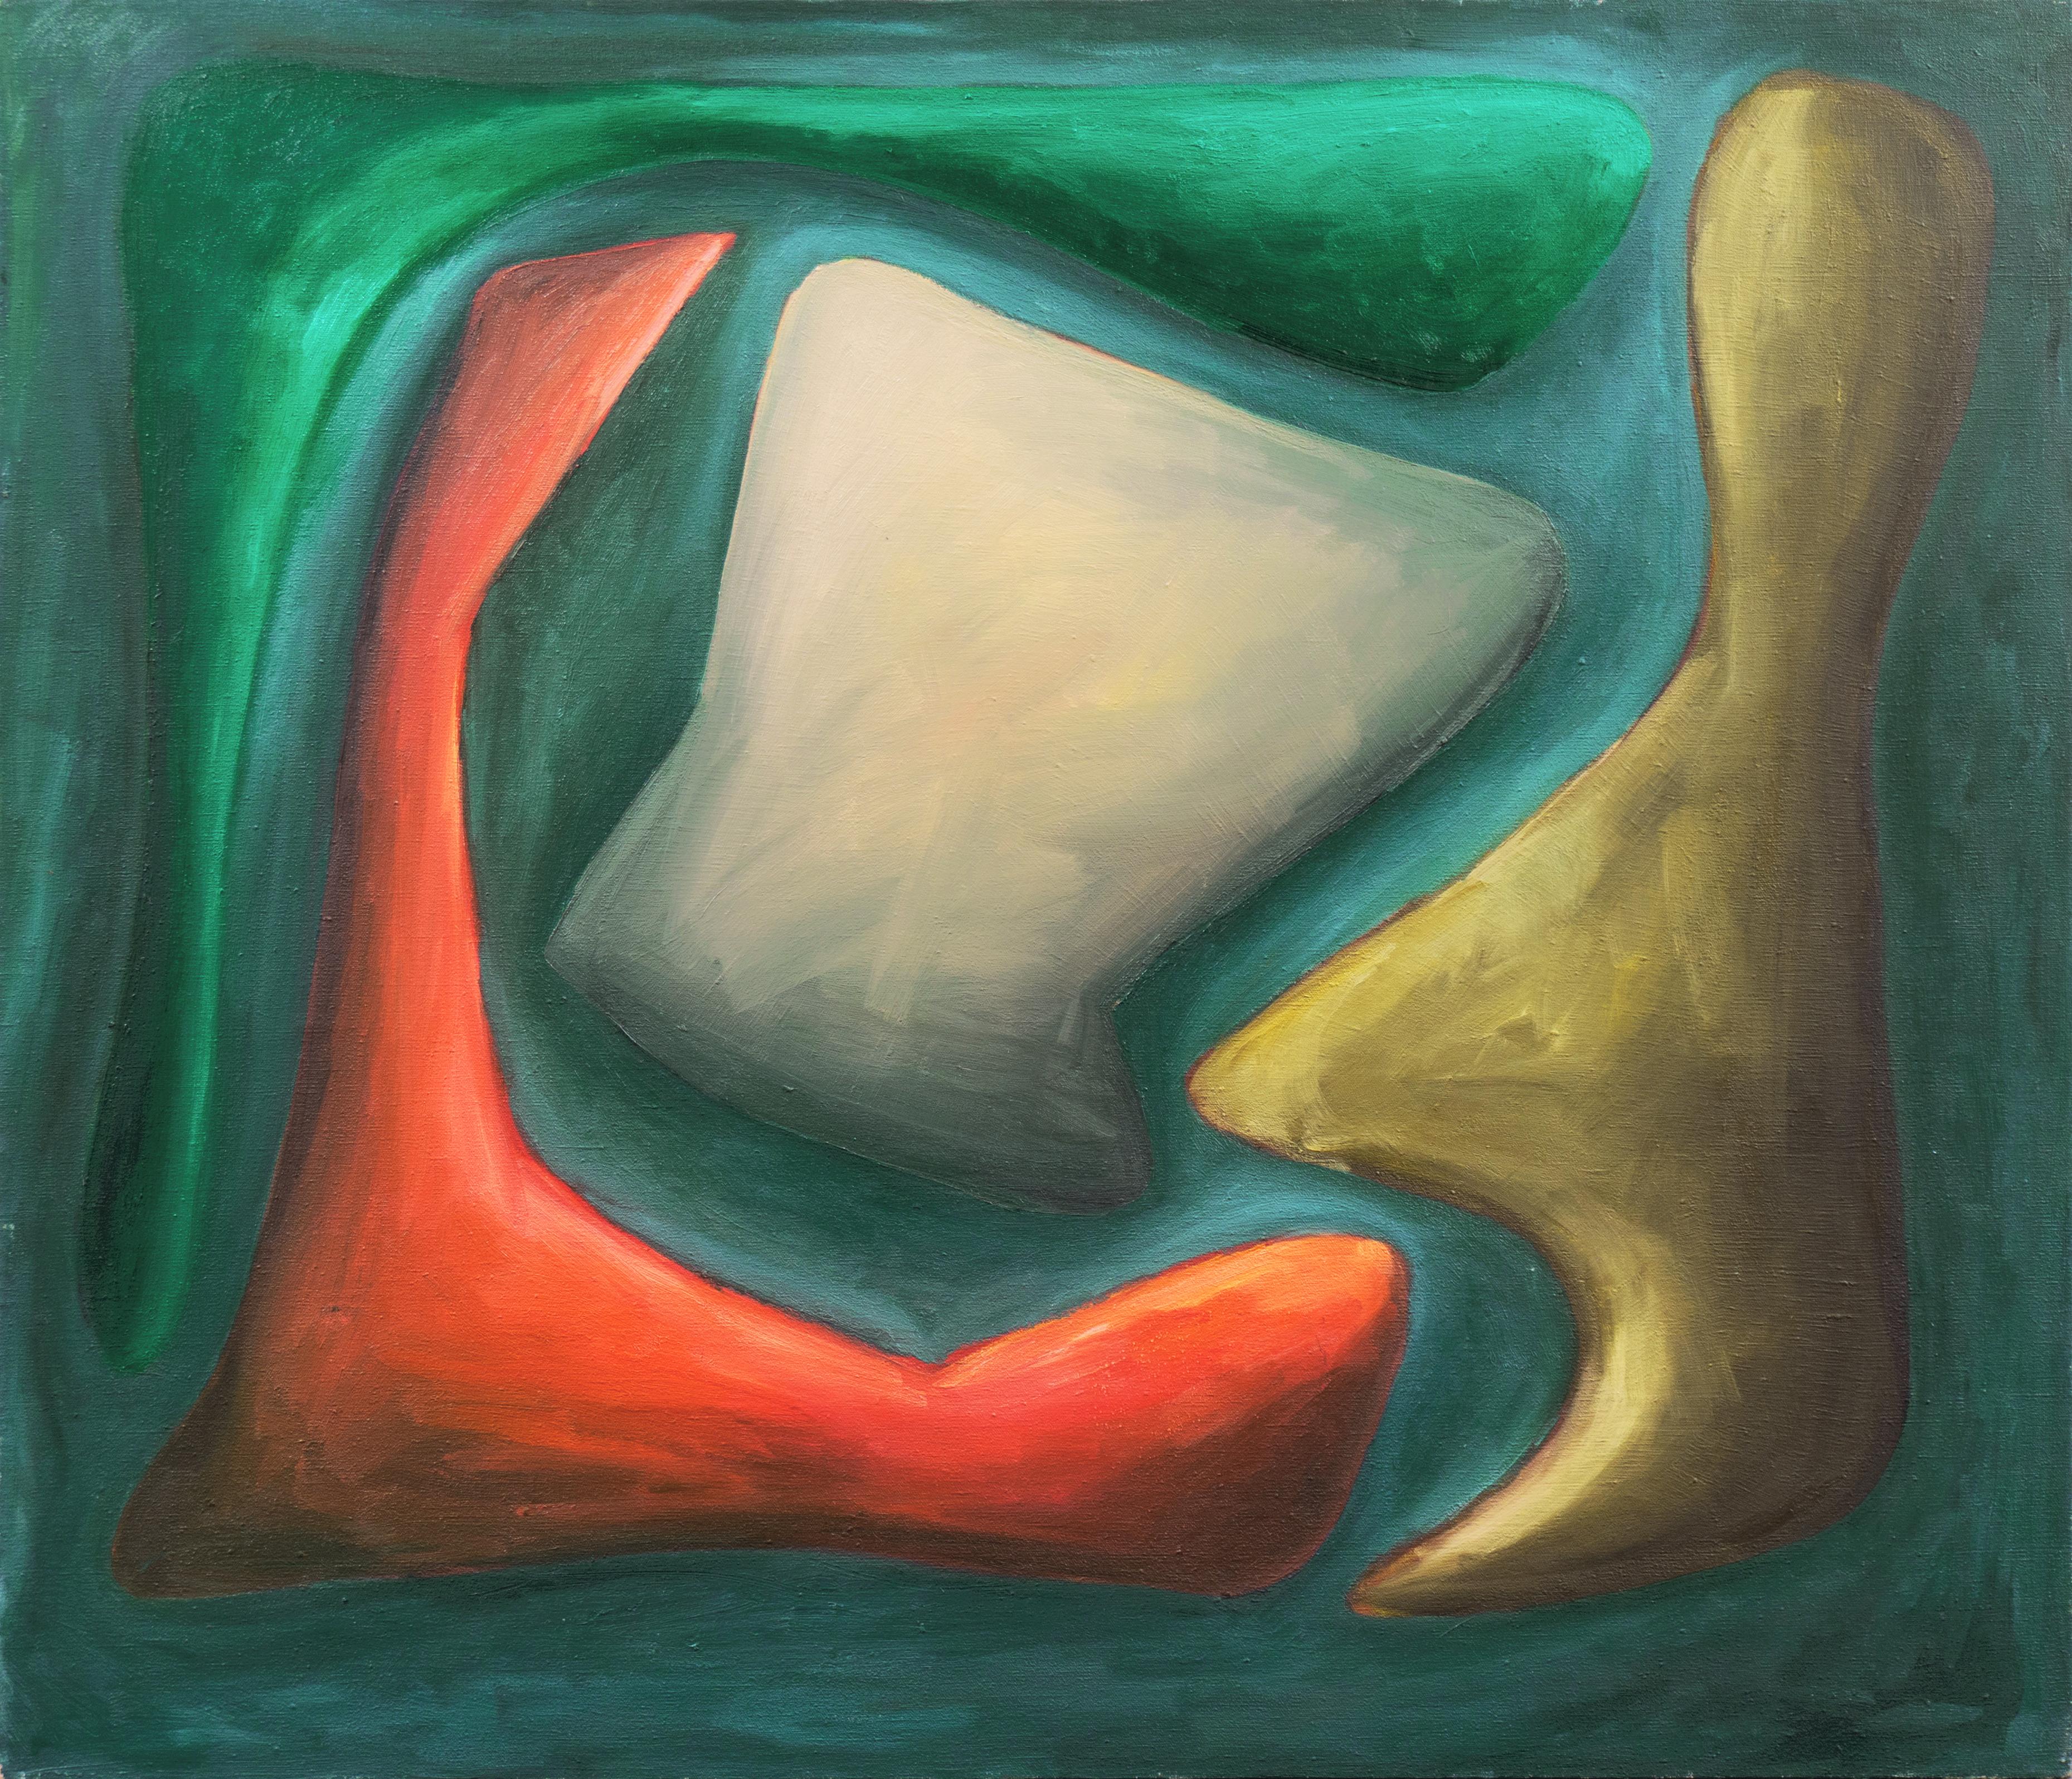 Keisler Abstract Painting - 'Abstract in Coral and Jade', Large Mid-century American Biomorphic Abstraction